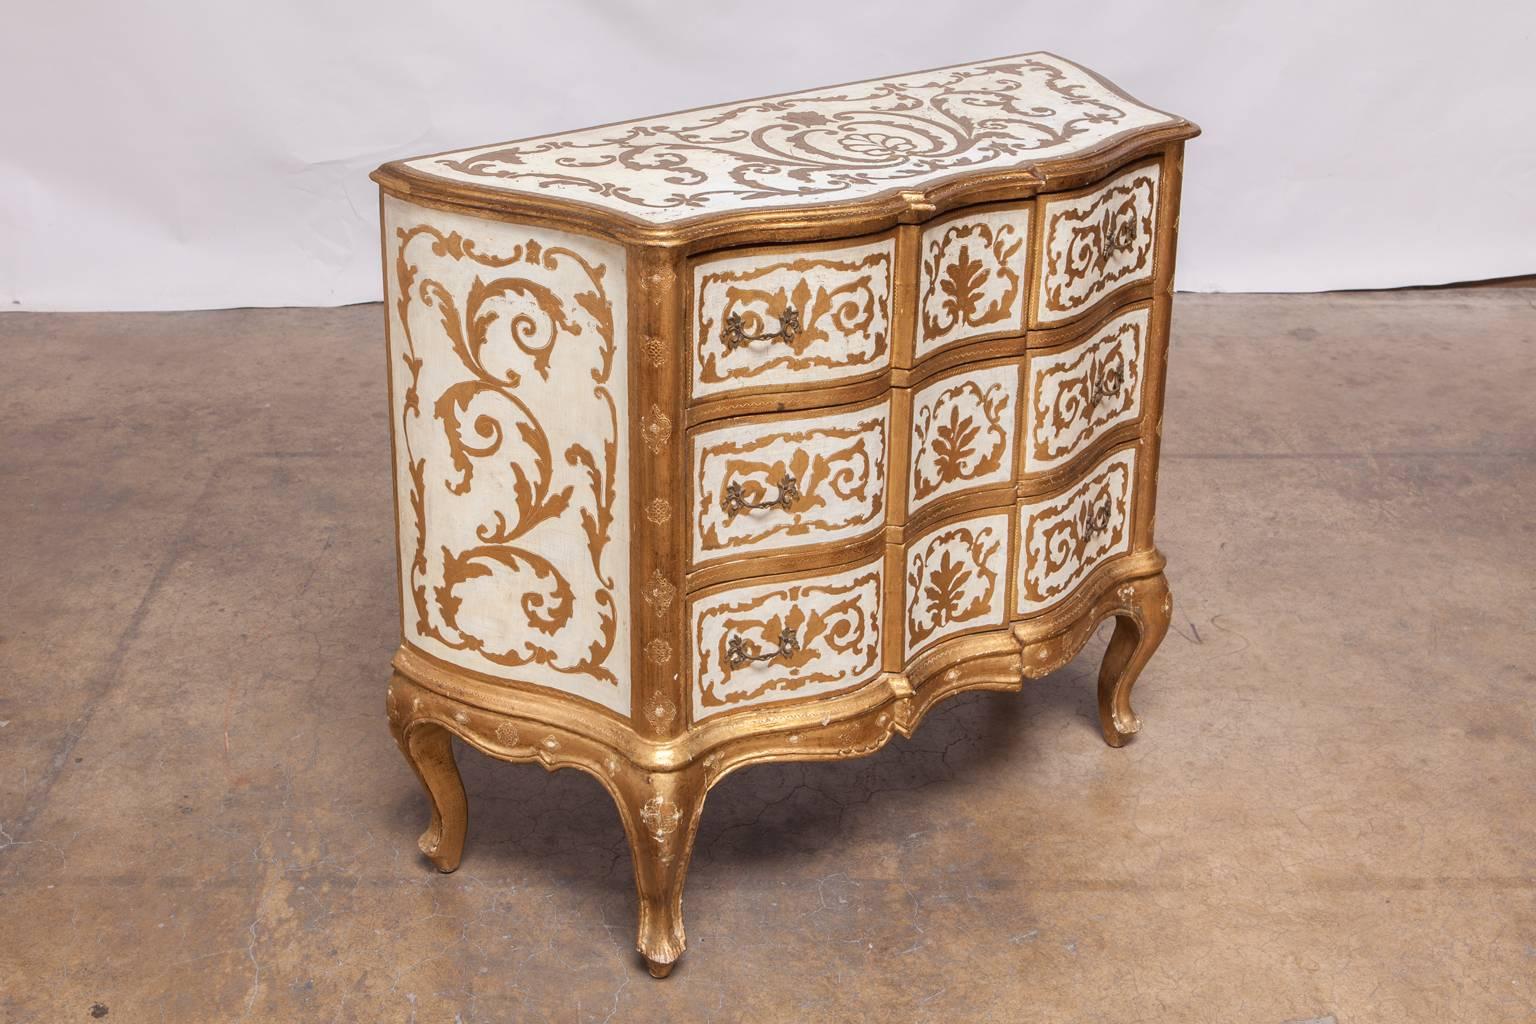 Lavish Italian chest of drawers made in the Florentine or Venetian style with gilt decoration and foliate motif. Fronted by three large drawers with metal pulls and supported by cabriole legs.